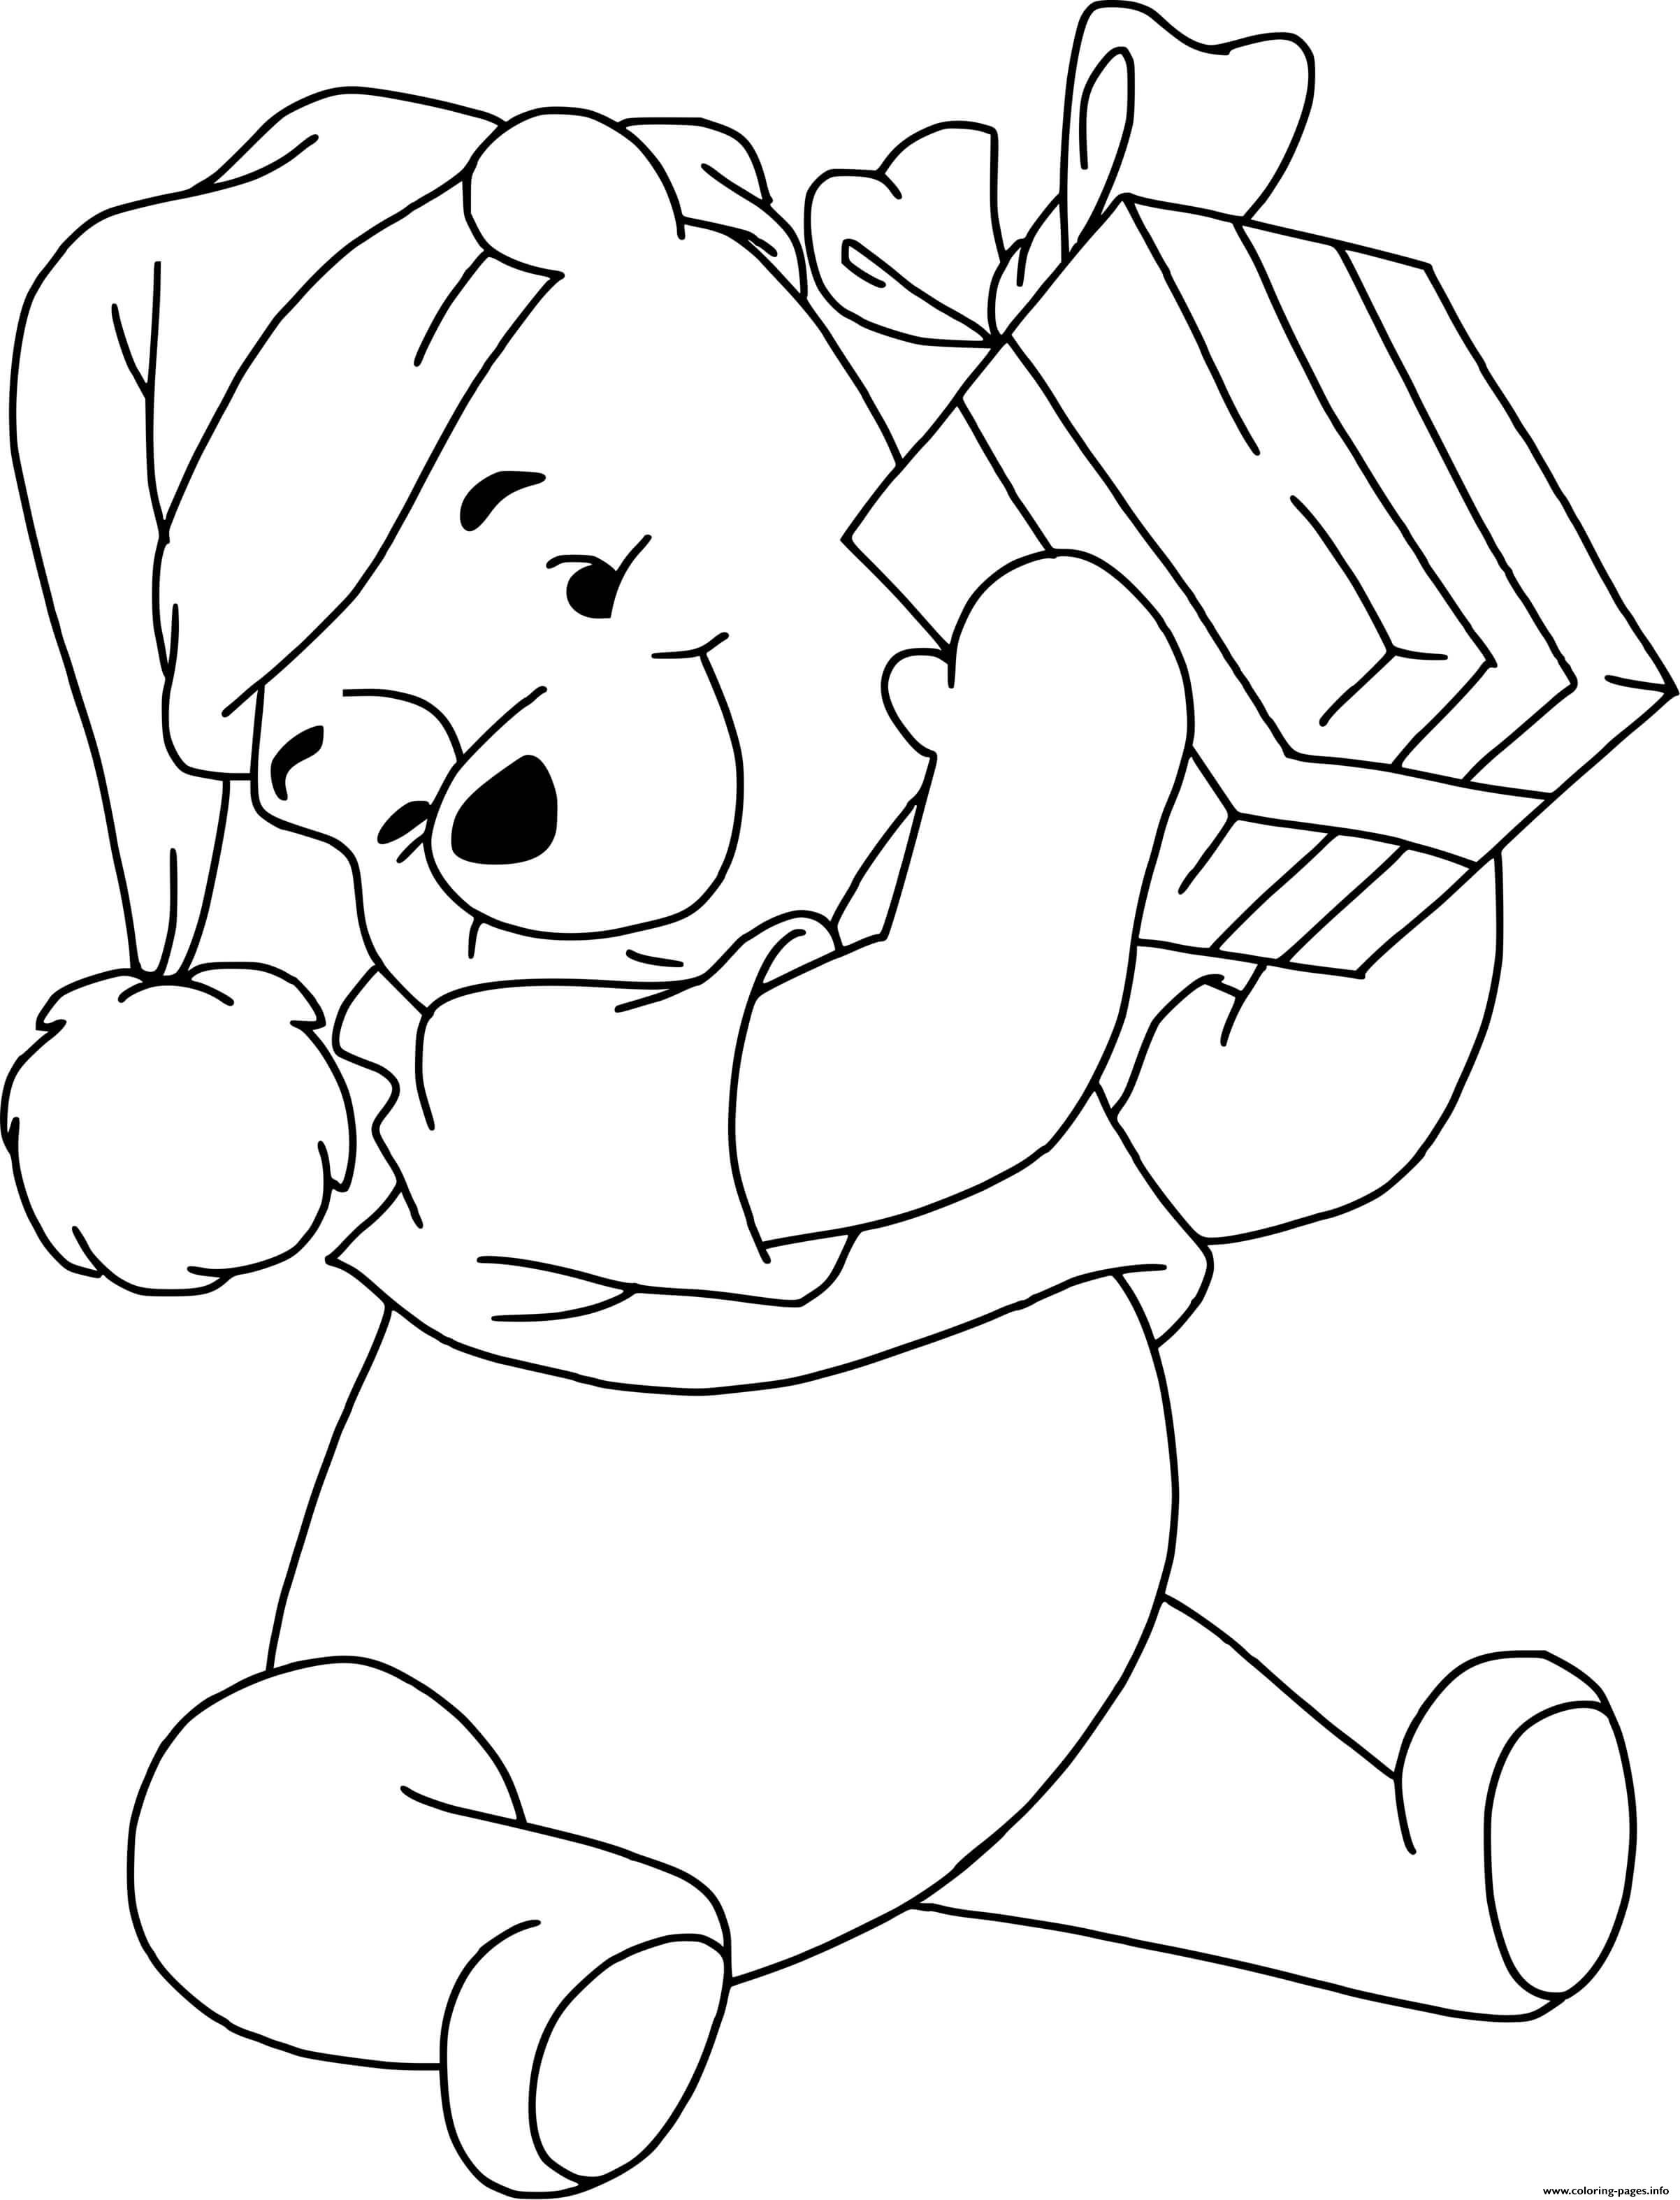 disney-colouring-book-for-kids-winnie-the-pooh-coloring-pages